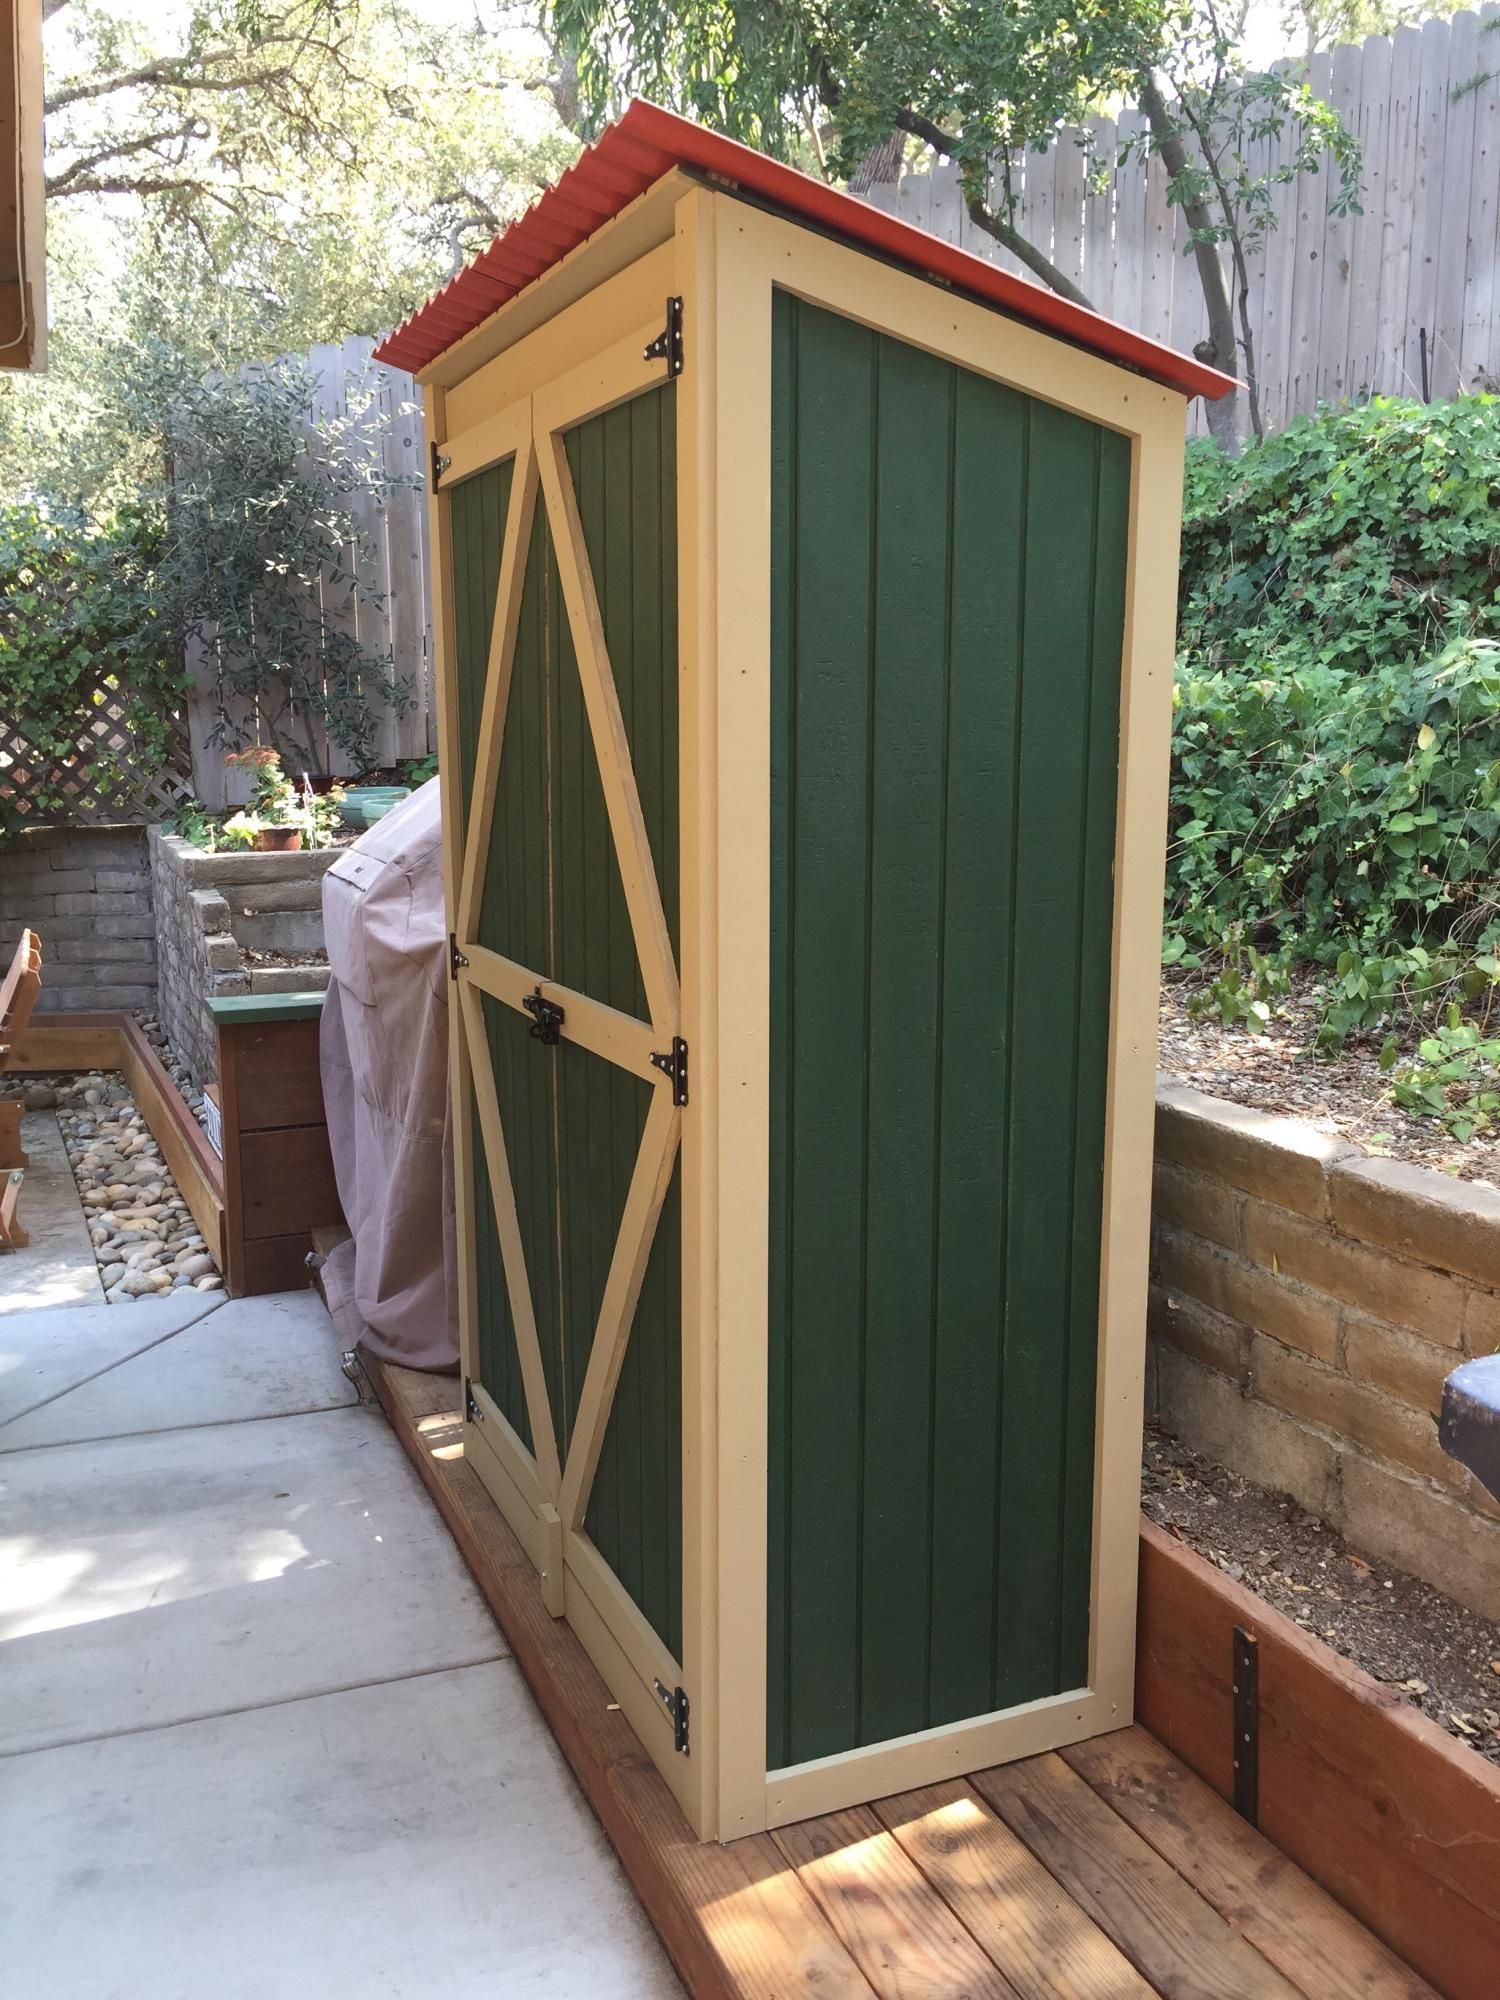 The Tiny Garden Hut: A Cozy Space for Outdoor Storage